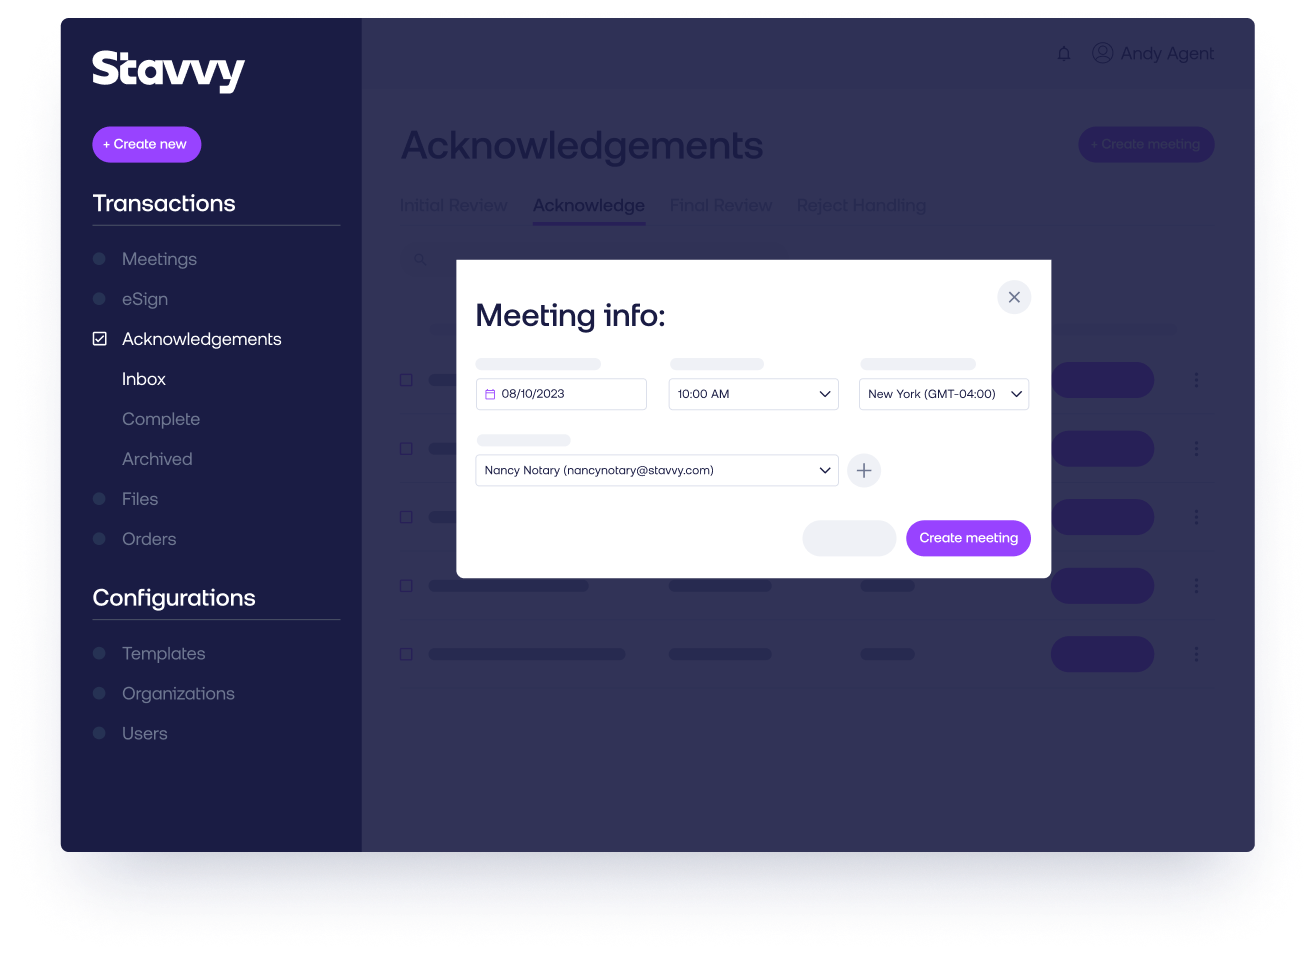 Illustration of scheduling an eClosing meeting with the Stavvy platform